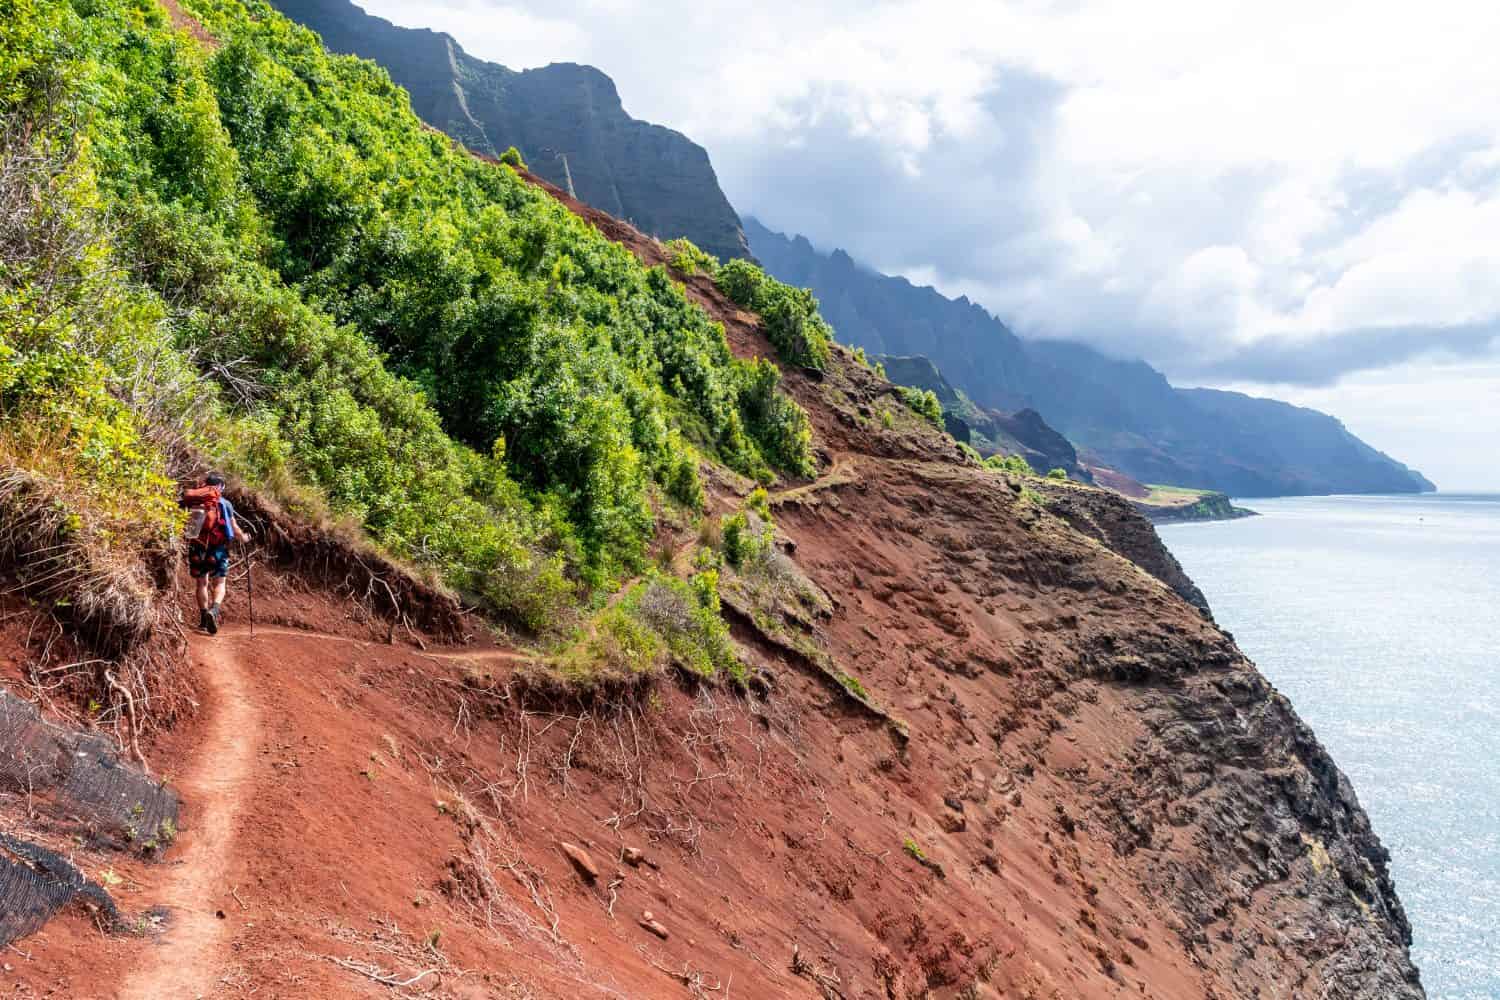 Hiker on a treacherous coastal trail with valleys and cliffs on one side and the ocean on the other. Shot on the Kalalau Trail in the Na Pali Coast State Park on the island of Kauai, Hawaii USA.